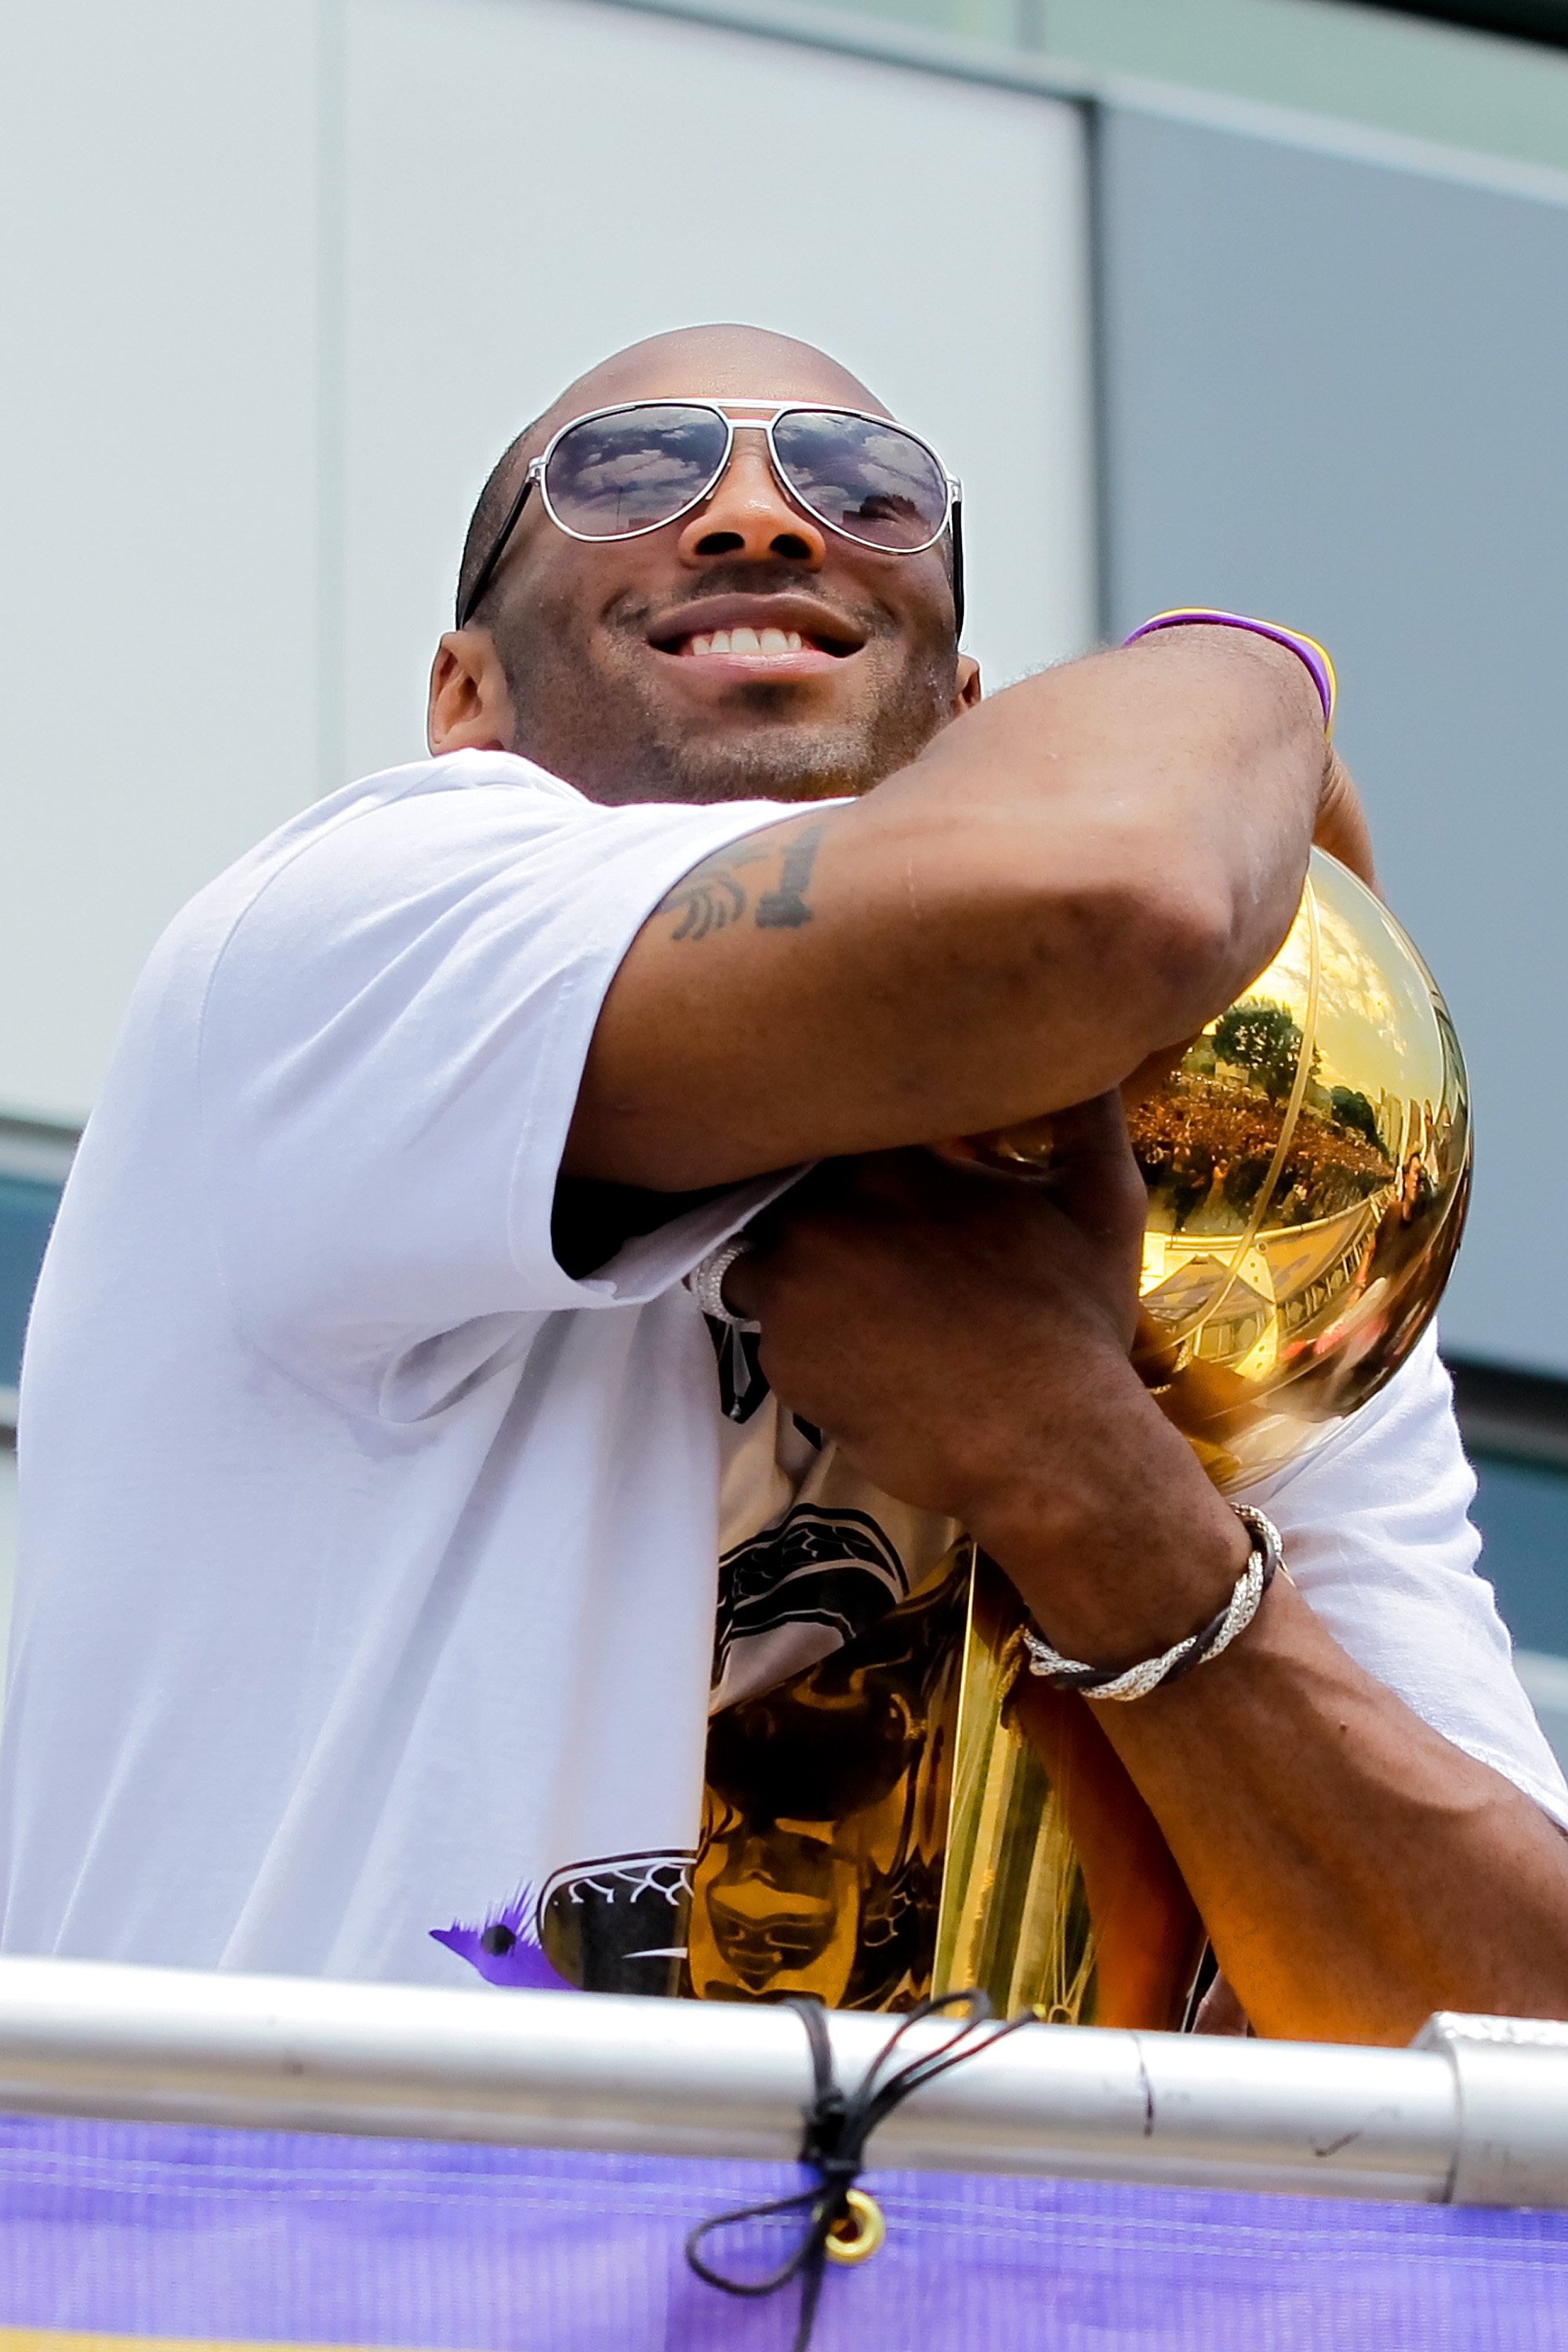 LOS ANGELES, CA - JUNE 21:  Los Angeles Lakers guard Kobe Bryant holds the championship trophy while riding in the victory parade for the the NBA basketball champion team on June 21, 2010 in Los Angeles, California. The Lakers beat the Boston Celtics 87-7